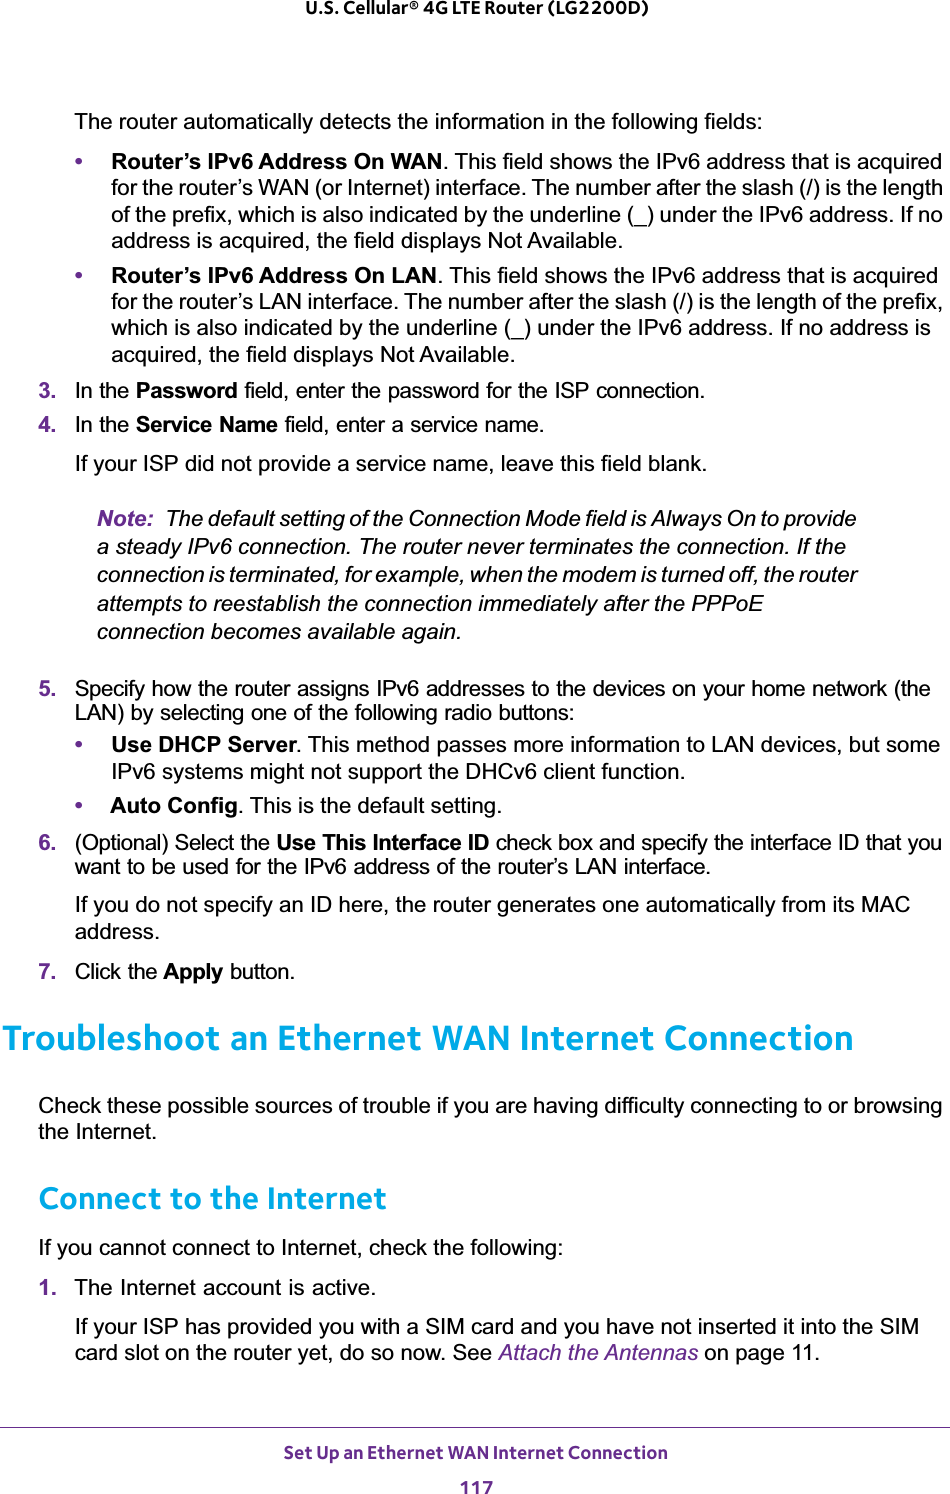 Set Up an Ethernet WAN Internet Connection117 U.S. Cellular® 4G LTE Router (LG2200D)The router automatically detects the information in the following fields:•Router’s IPv6 Address On WAN. This field shows the IPv6 address that is acquired for the router’s WAN (or Internet) interface. The number after the slash (/) is the length of the prefix, which is also indicated by the underline (_) under the IPv6 address. If no address is acquired, the field displays Not Available.•Router’s IPv6 Address On LAN. This field shows the IPv6 address that is acquired for the router’s LAN interface. The number after the slash (/) is the length of the prefix, which is also indicated by the underline (_) under the IPv6 address. If no address is acquired, the field displays Not Available.3. In the Password field, enter the password for the ISP connection.4. In the Service Name field, enter a service name.If your ISP did not provide a service name, leave this field blank.Note: The default setting of the Connection Mode field is Always On to provide a steady IPv6 connection. The router never terminates the connection. If the connection is terminated, for example, when the modem is turned off, the router attempts to reestablish the connection immediately after the PPPoE connection becomes available again.5. Specify how the router assigns IPv6 addresses to the devices on your home network (the LAN) by selecting one of the following radio buttons:•Use DHCP Server. This method passes more information to LAN devices, but some IPv6 systems might not support the DHCv6 client function.•Auto Config. This is the default setting.6. (Optional) Select the Use This Interface ID check box and specify the interface ID that you want to be used for the IPv6 address of the router’s LAN interface.If you do not specify an ID here, the router generates one automatically from its MAC address.7. Click the Apply button.Troubleshoot an Ethernet WAN Internet ConnectionCheck these possible sources of trouble if you are having difficulty connecting to or browsing the Internet.Connect to the InternetIf you cannot connect to Internet, check the following:1. The Internet account is active.If your ISP has provided you with a SIM card and you have not inserted it into the SIM card slot on the router yet, do so now. See Attach the Antennas on page 11.